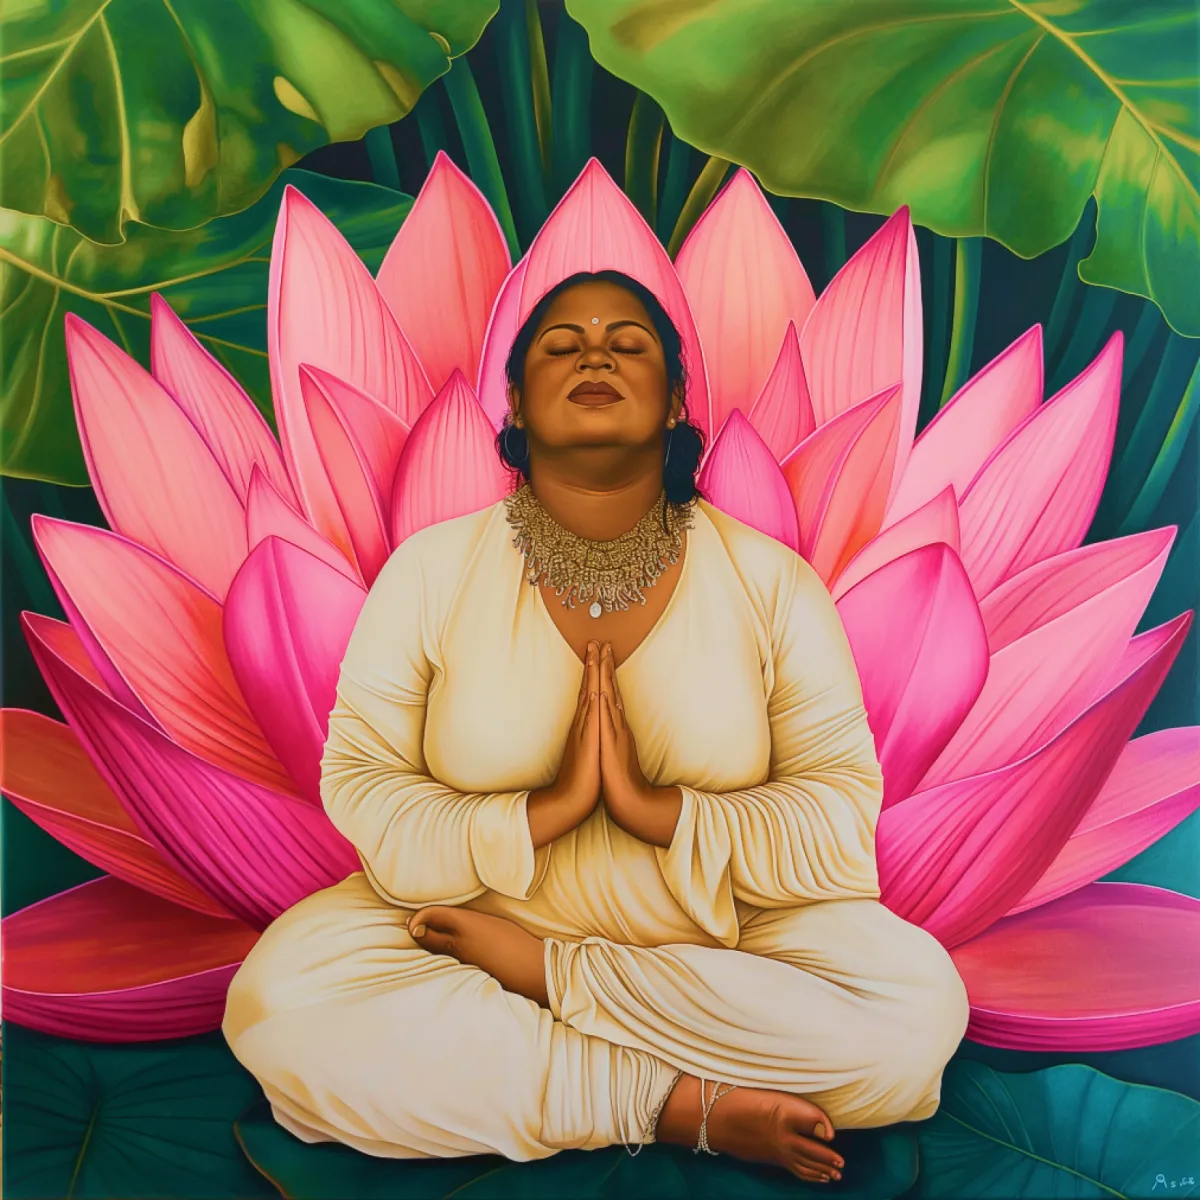 Image of woman meditating in front of a pink lotus flower.